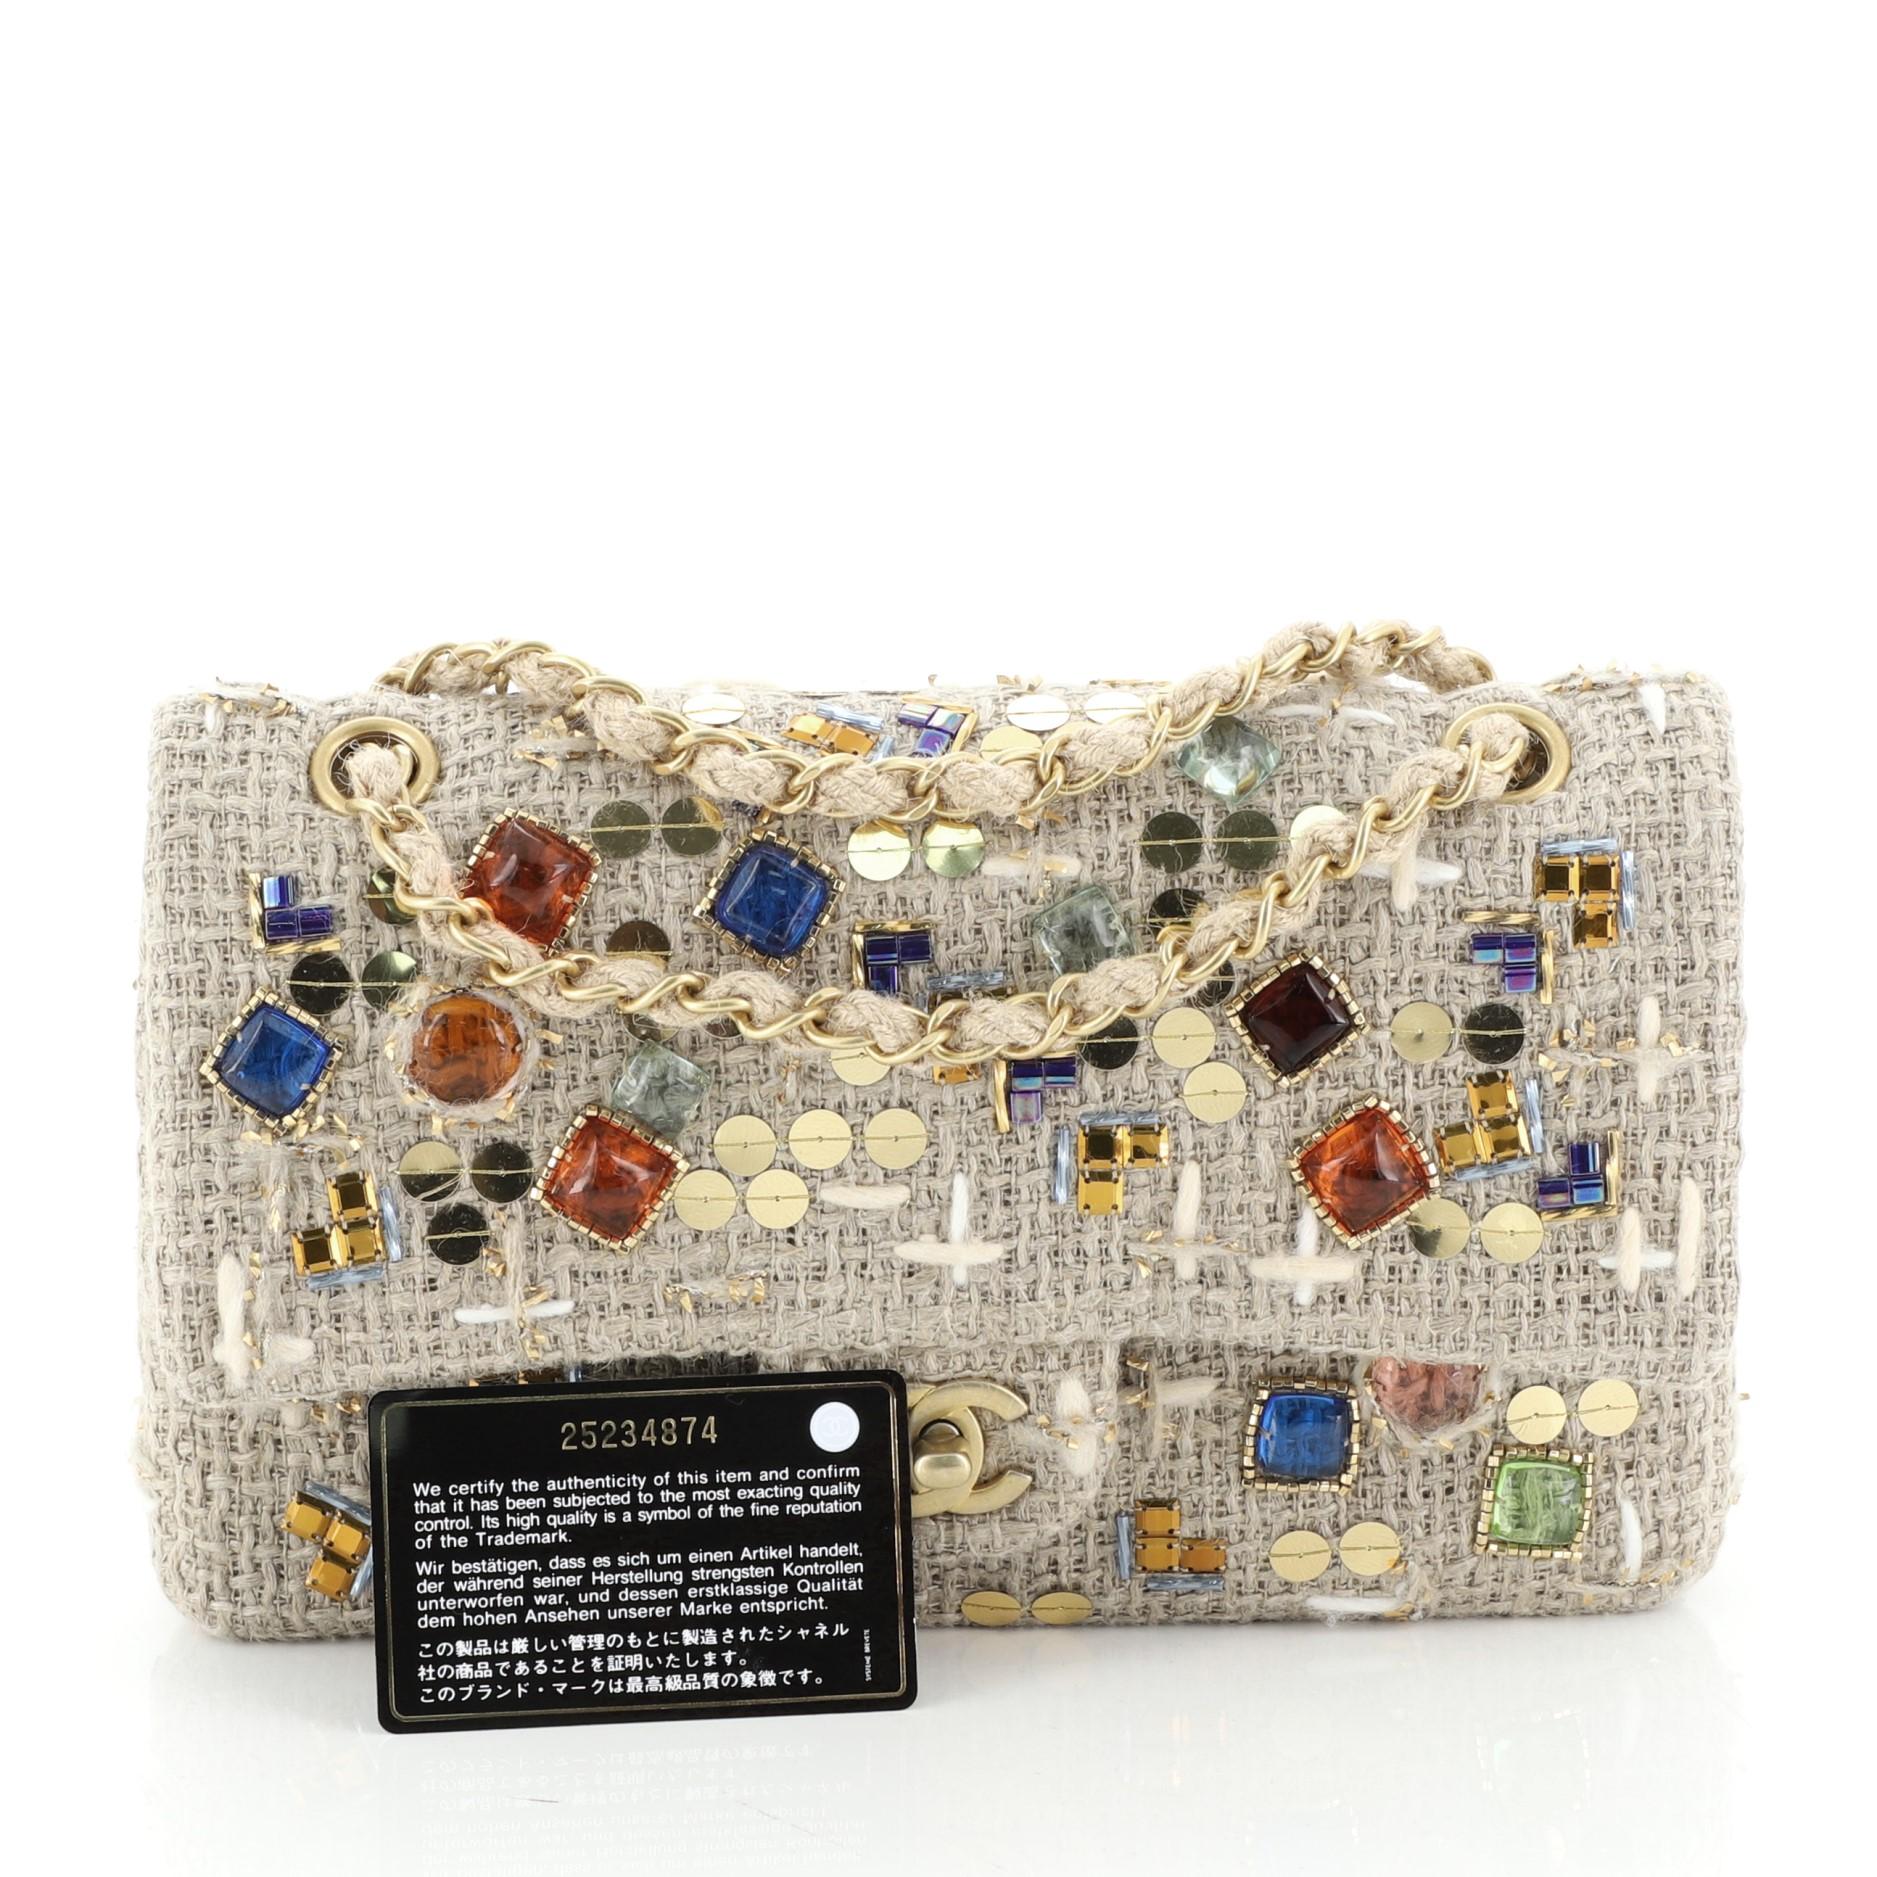 This Chanel Classic Double Flap Bag Embellished Woven Raffia Medium, crafted in neutral embellished woven raffia, features chain link strap, multicolor rhinestones and gold-tone hardware. Its double flap and CC turn lock closure opens to a neutral